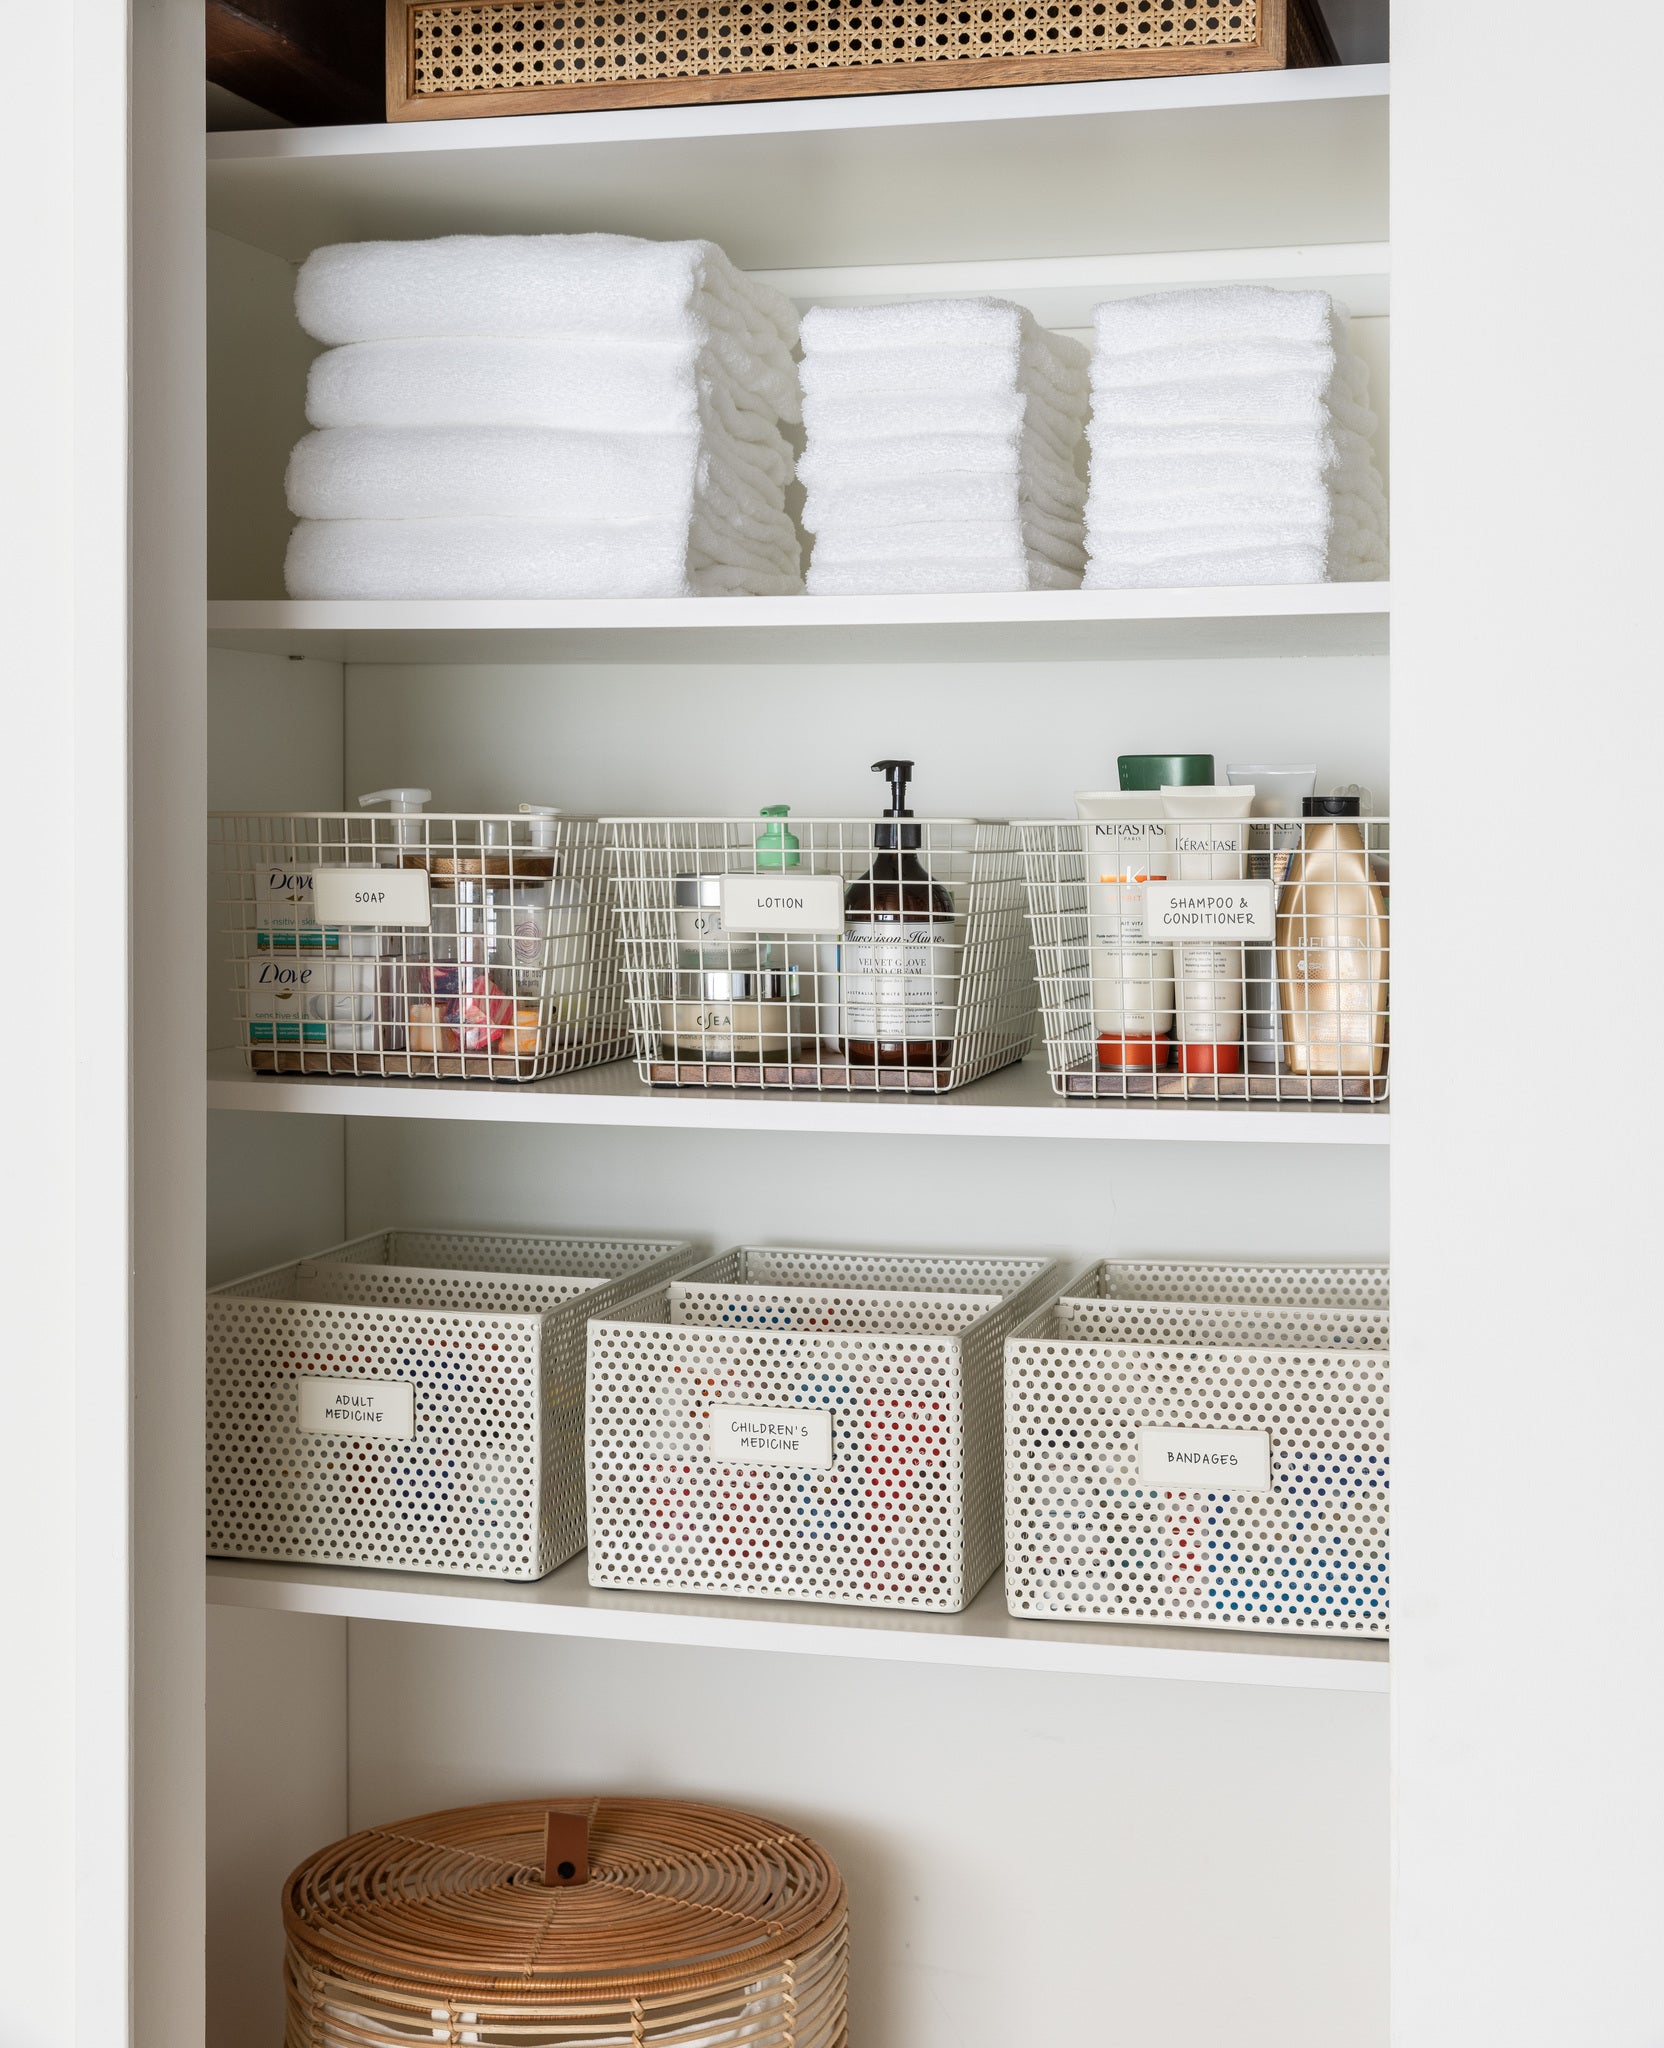 How to Organize a Pantry of Any Size